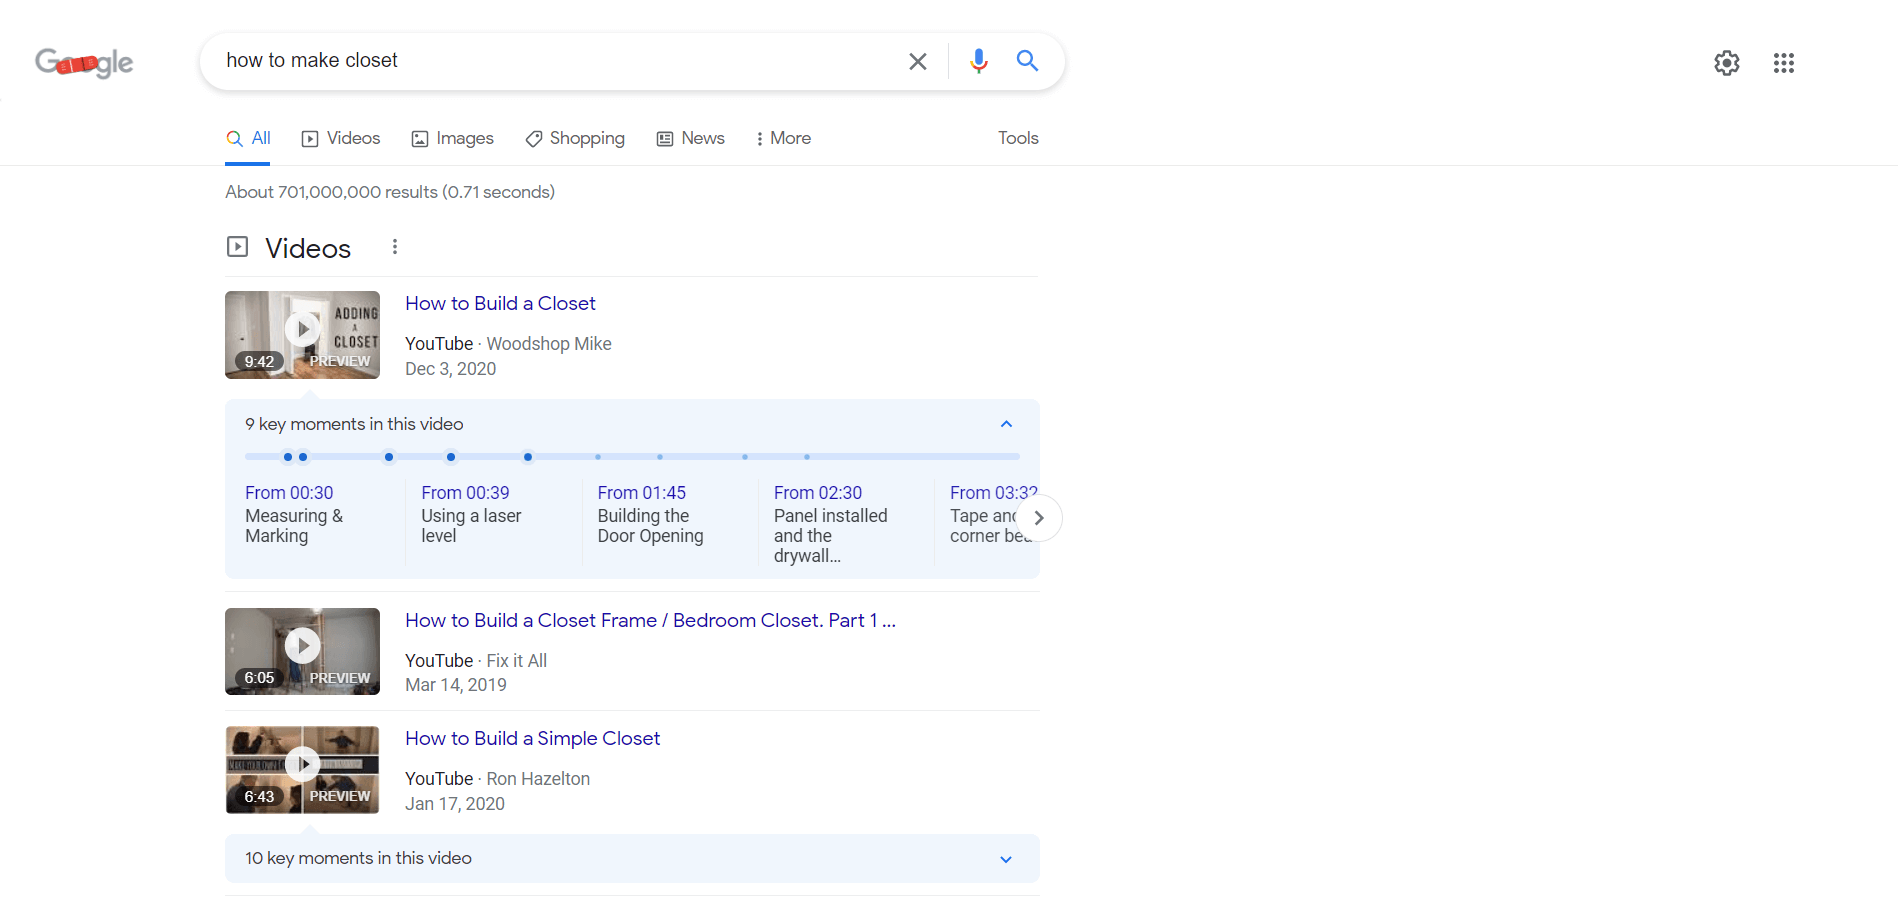 Video in Google search results page